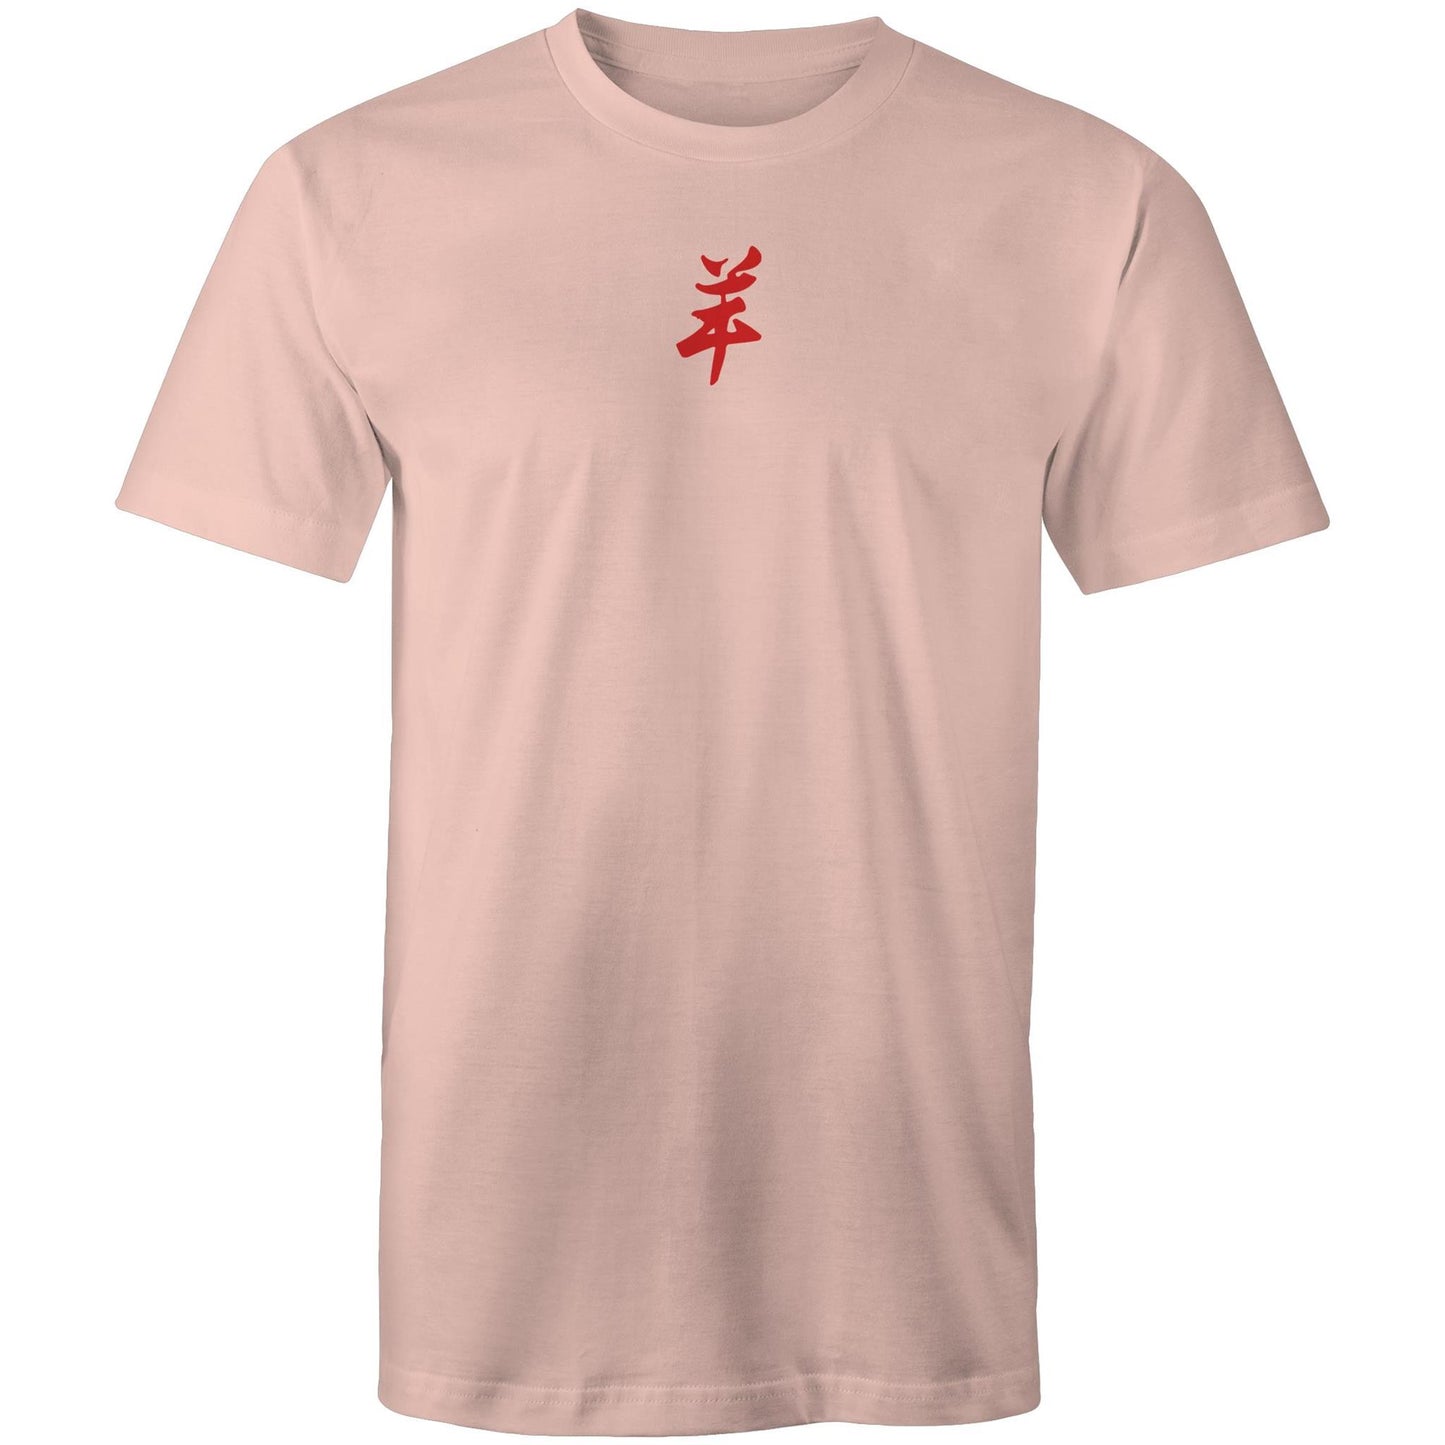 Year of the Goat T Shirts for Men (Unisex)